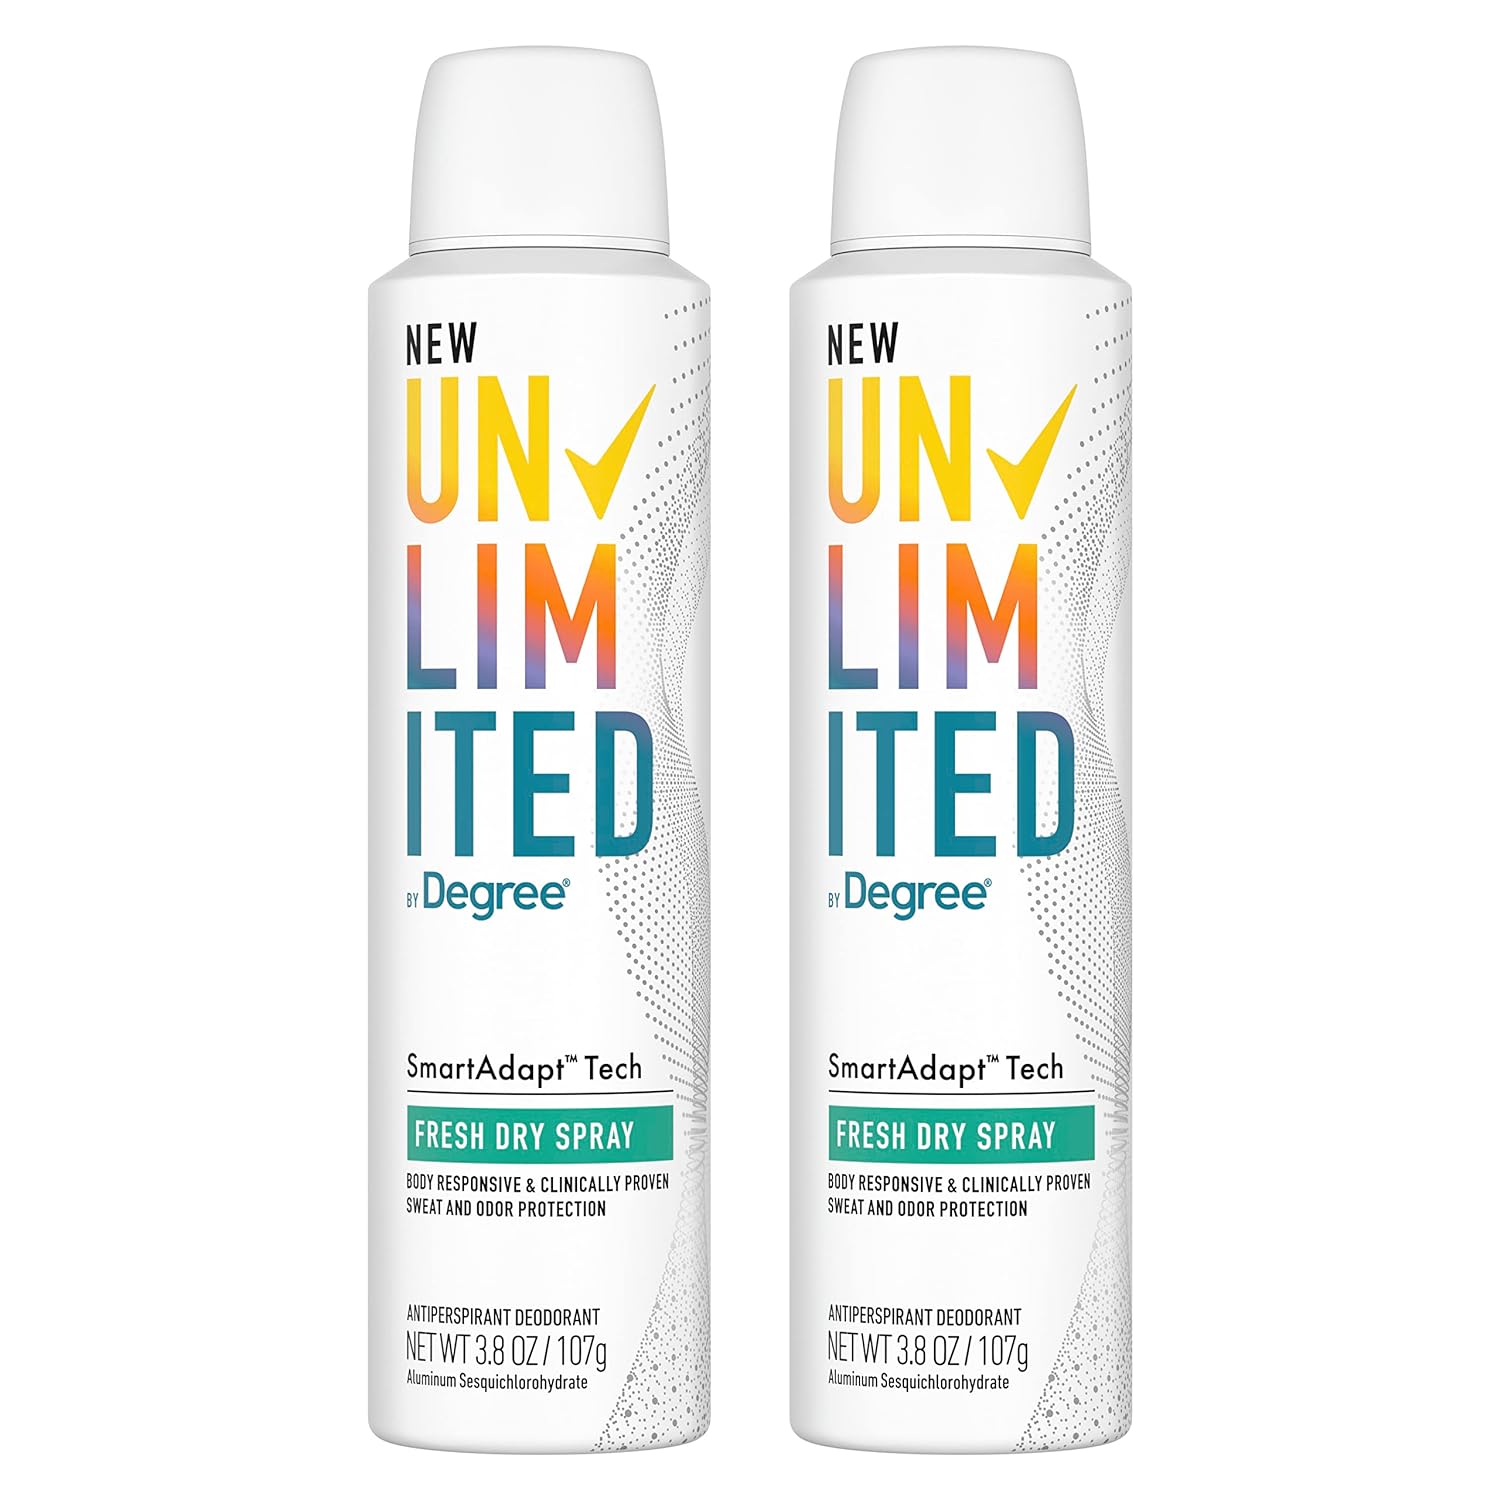 Degree Unlimited Antiperspirant Deodorant Dry Spray Fresh 2 Count Long-Lasting Sweat & Odor Protection with Antiperspirant Technology SmartAdapt Tech 3.8 oz